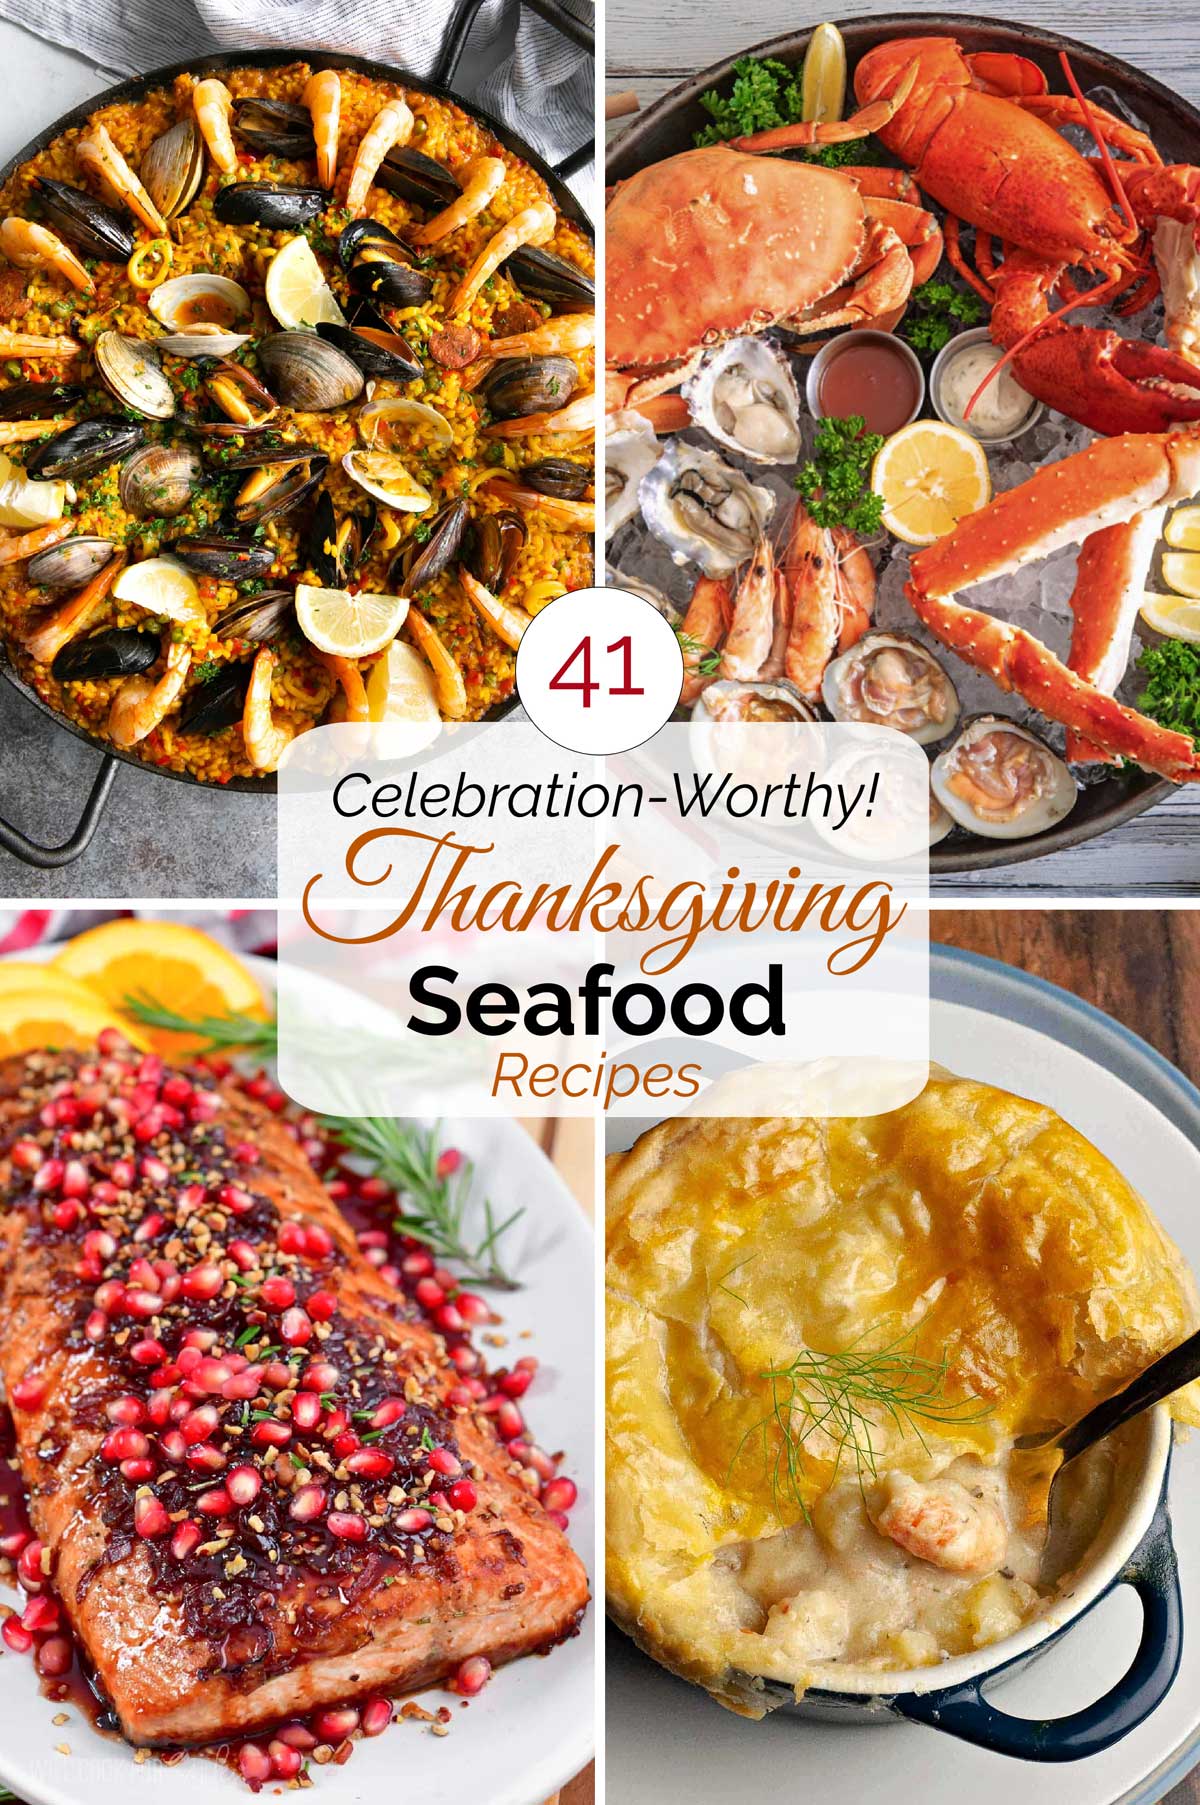 Collage of 4 recipe photos with central text overlay reading "Pinnable graphic showing 4 recipes with text "41 Celebration-Worthy! Thanksgiving Seafood Recipes".